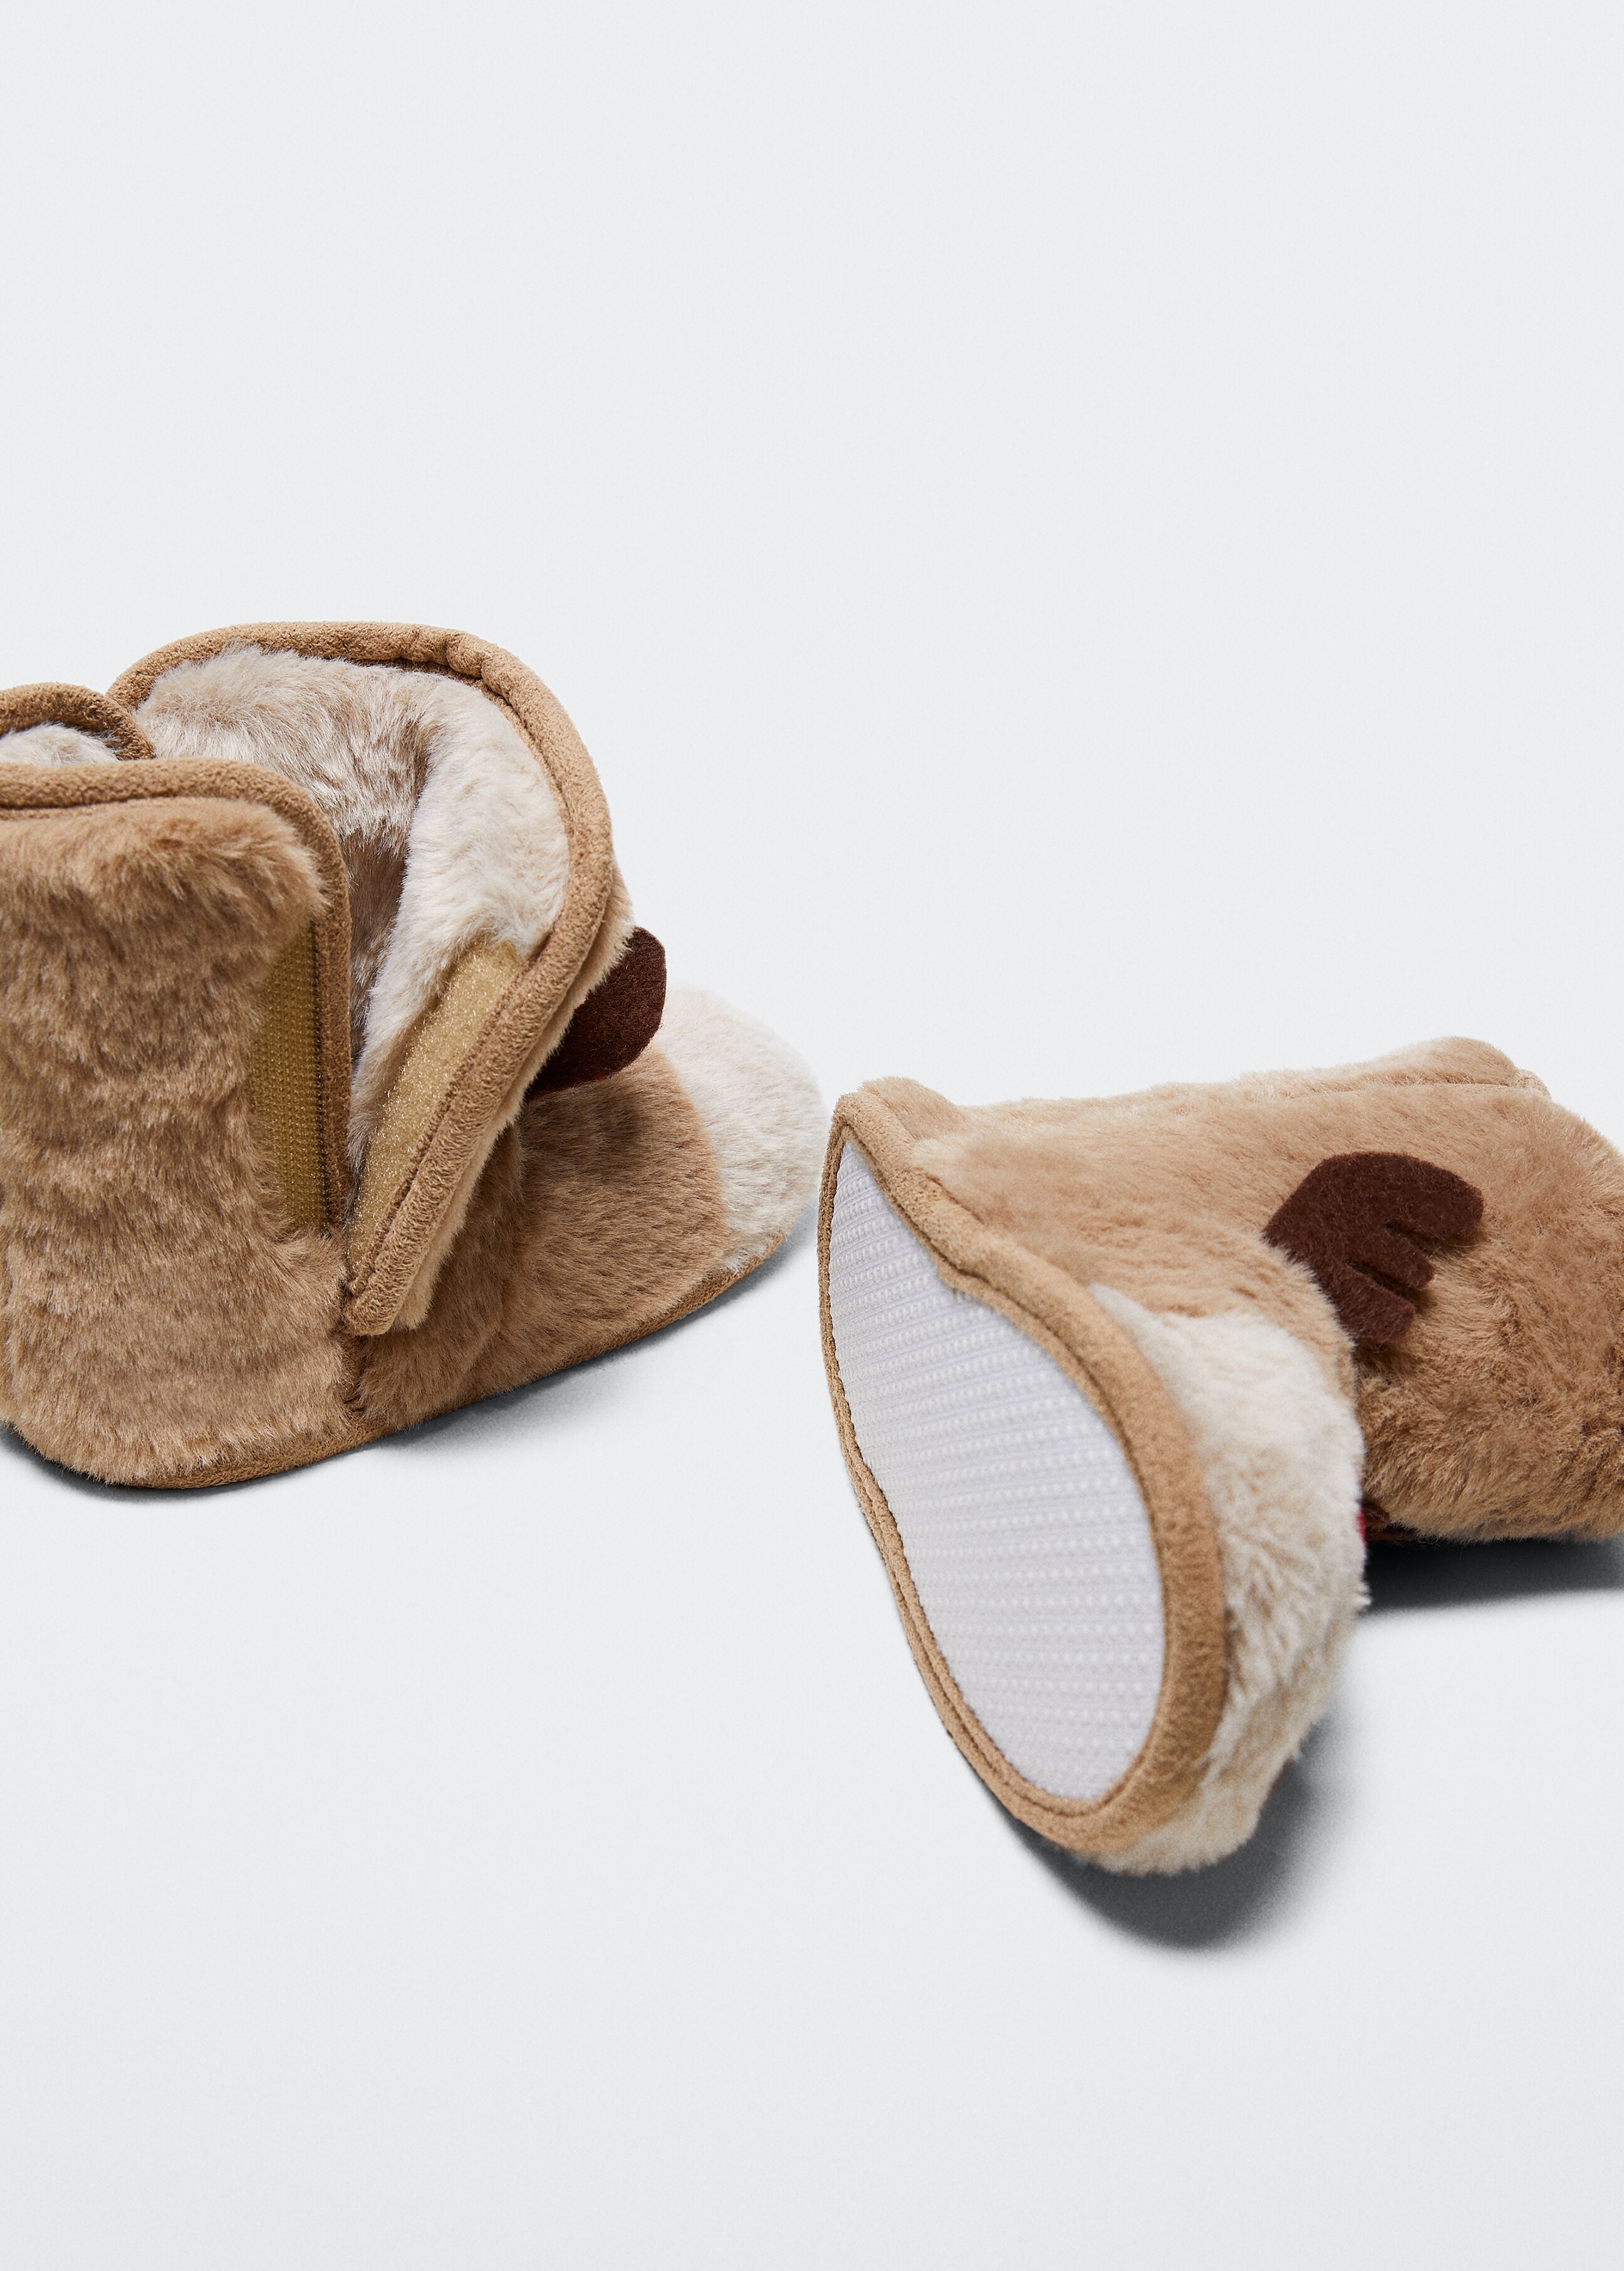 Reindeer slippers - Details of the article 3